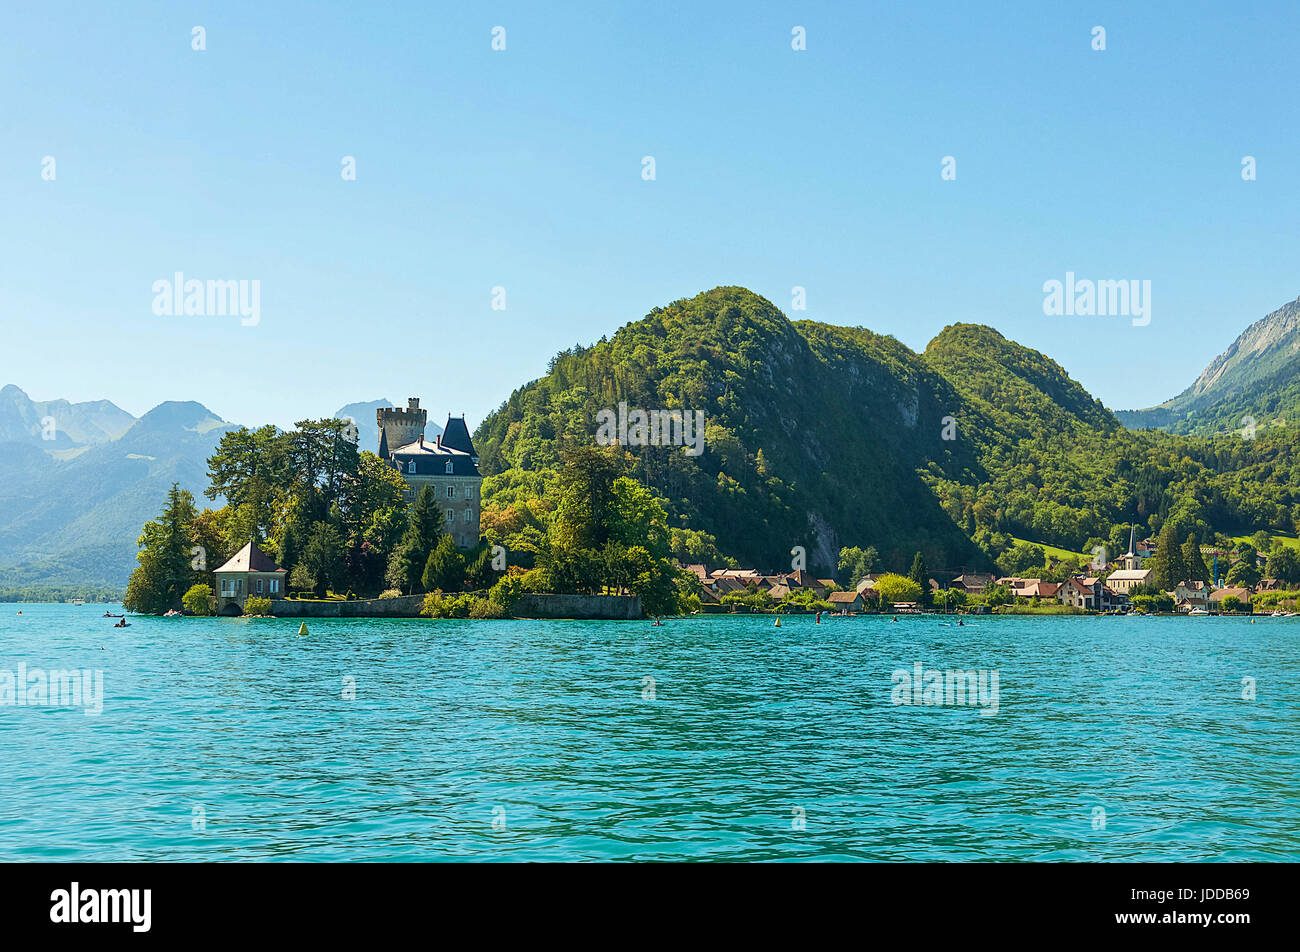 Lake Annecy and Mountain Range, Annecy, France Stock Photo